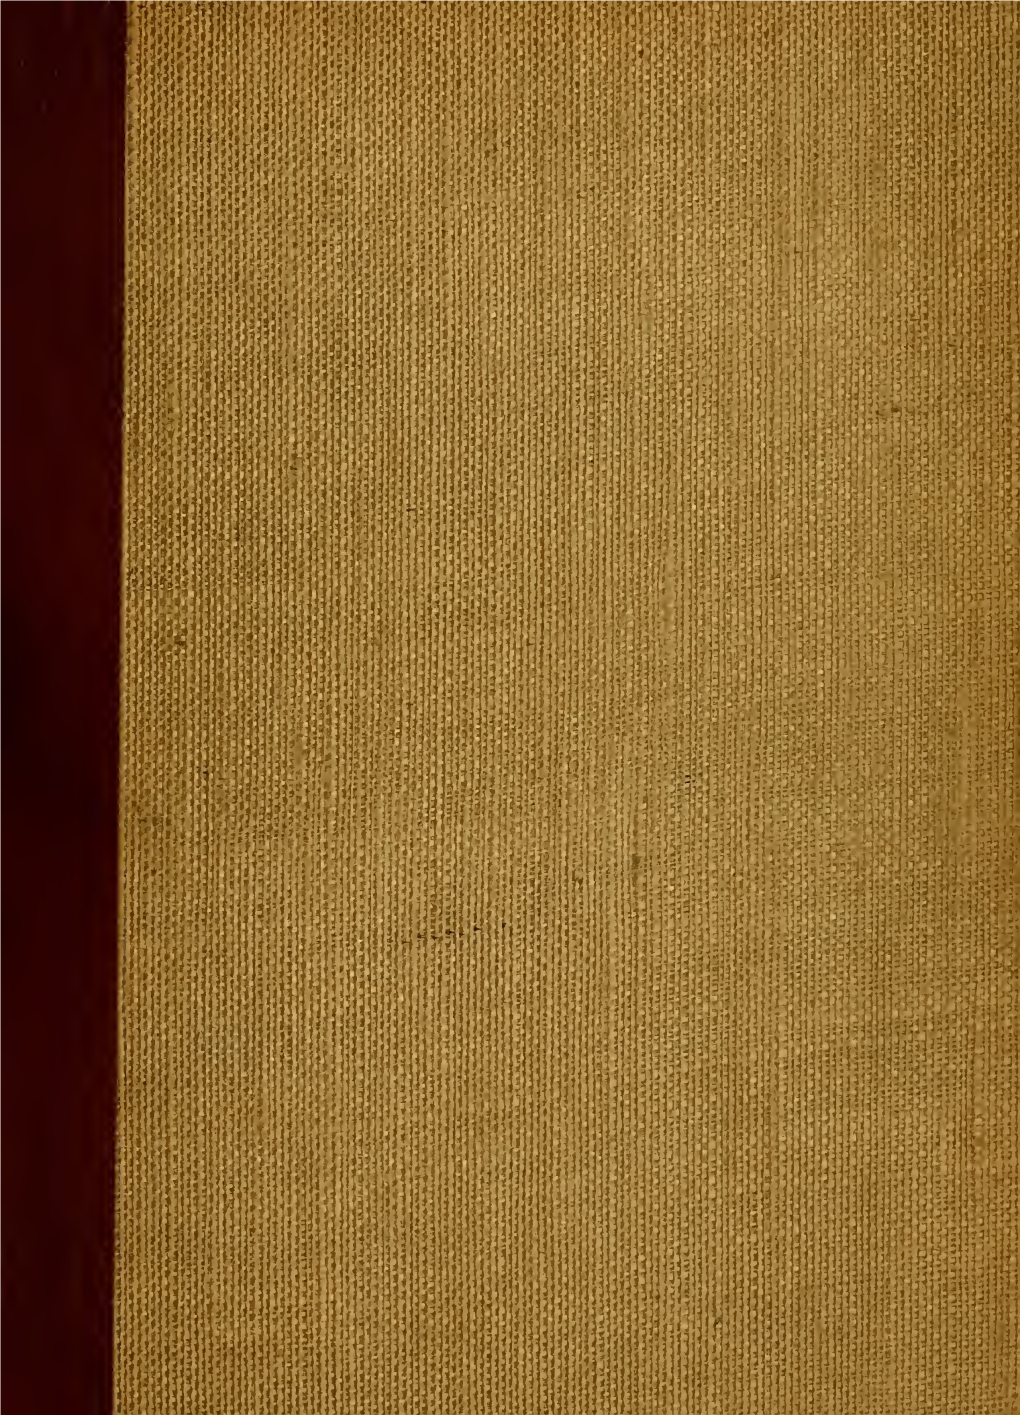 1933 Yearbook